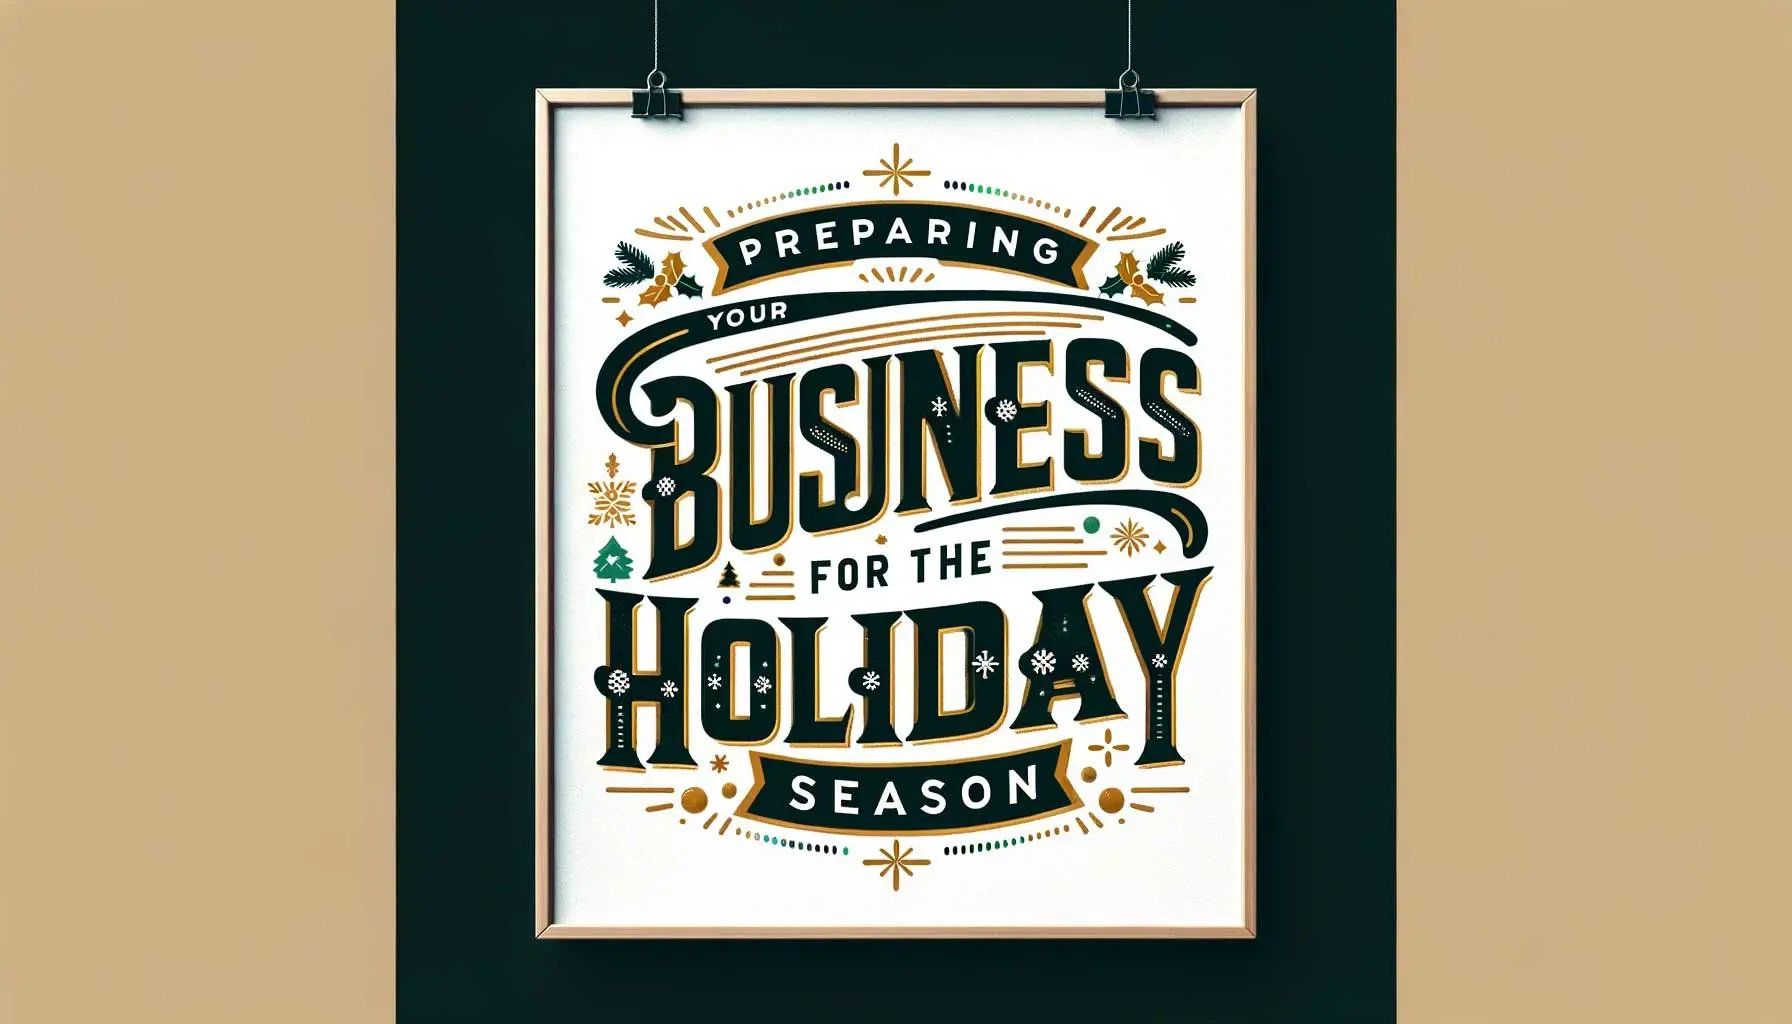 Preparing your business for the holidays